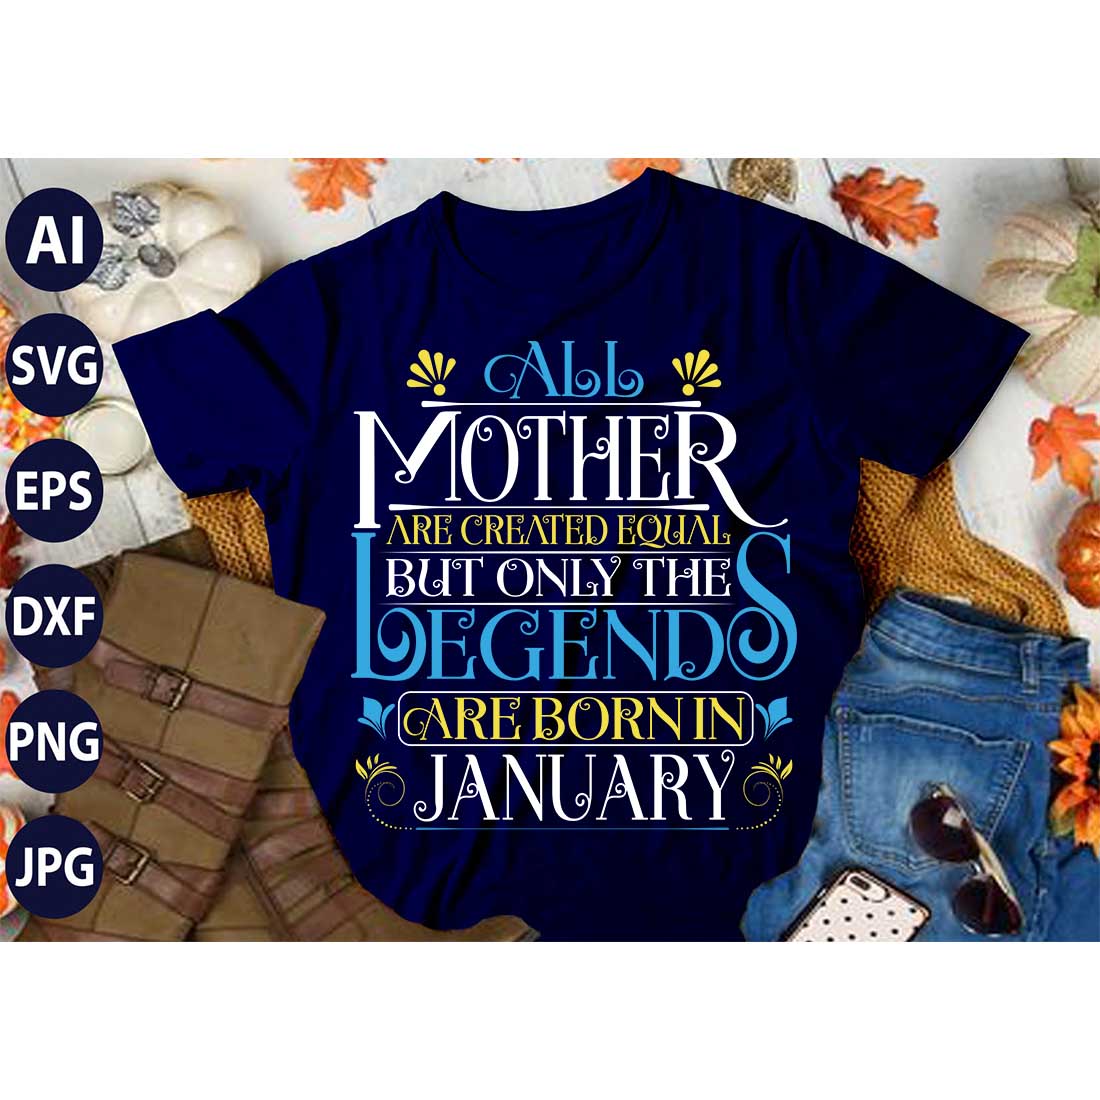 All Mother are equal but legends are born in, SVG T-Shirt Design |Love Is Mother Typography Tshirt Design | Ai, Svg, Eps, Dxf, Jpeg, Png, Instant download T-Shirt | 100% print-ready Digital vector file preview image.